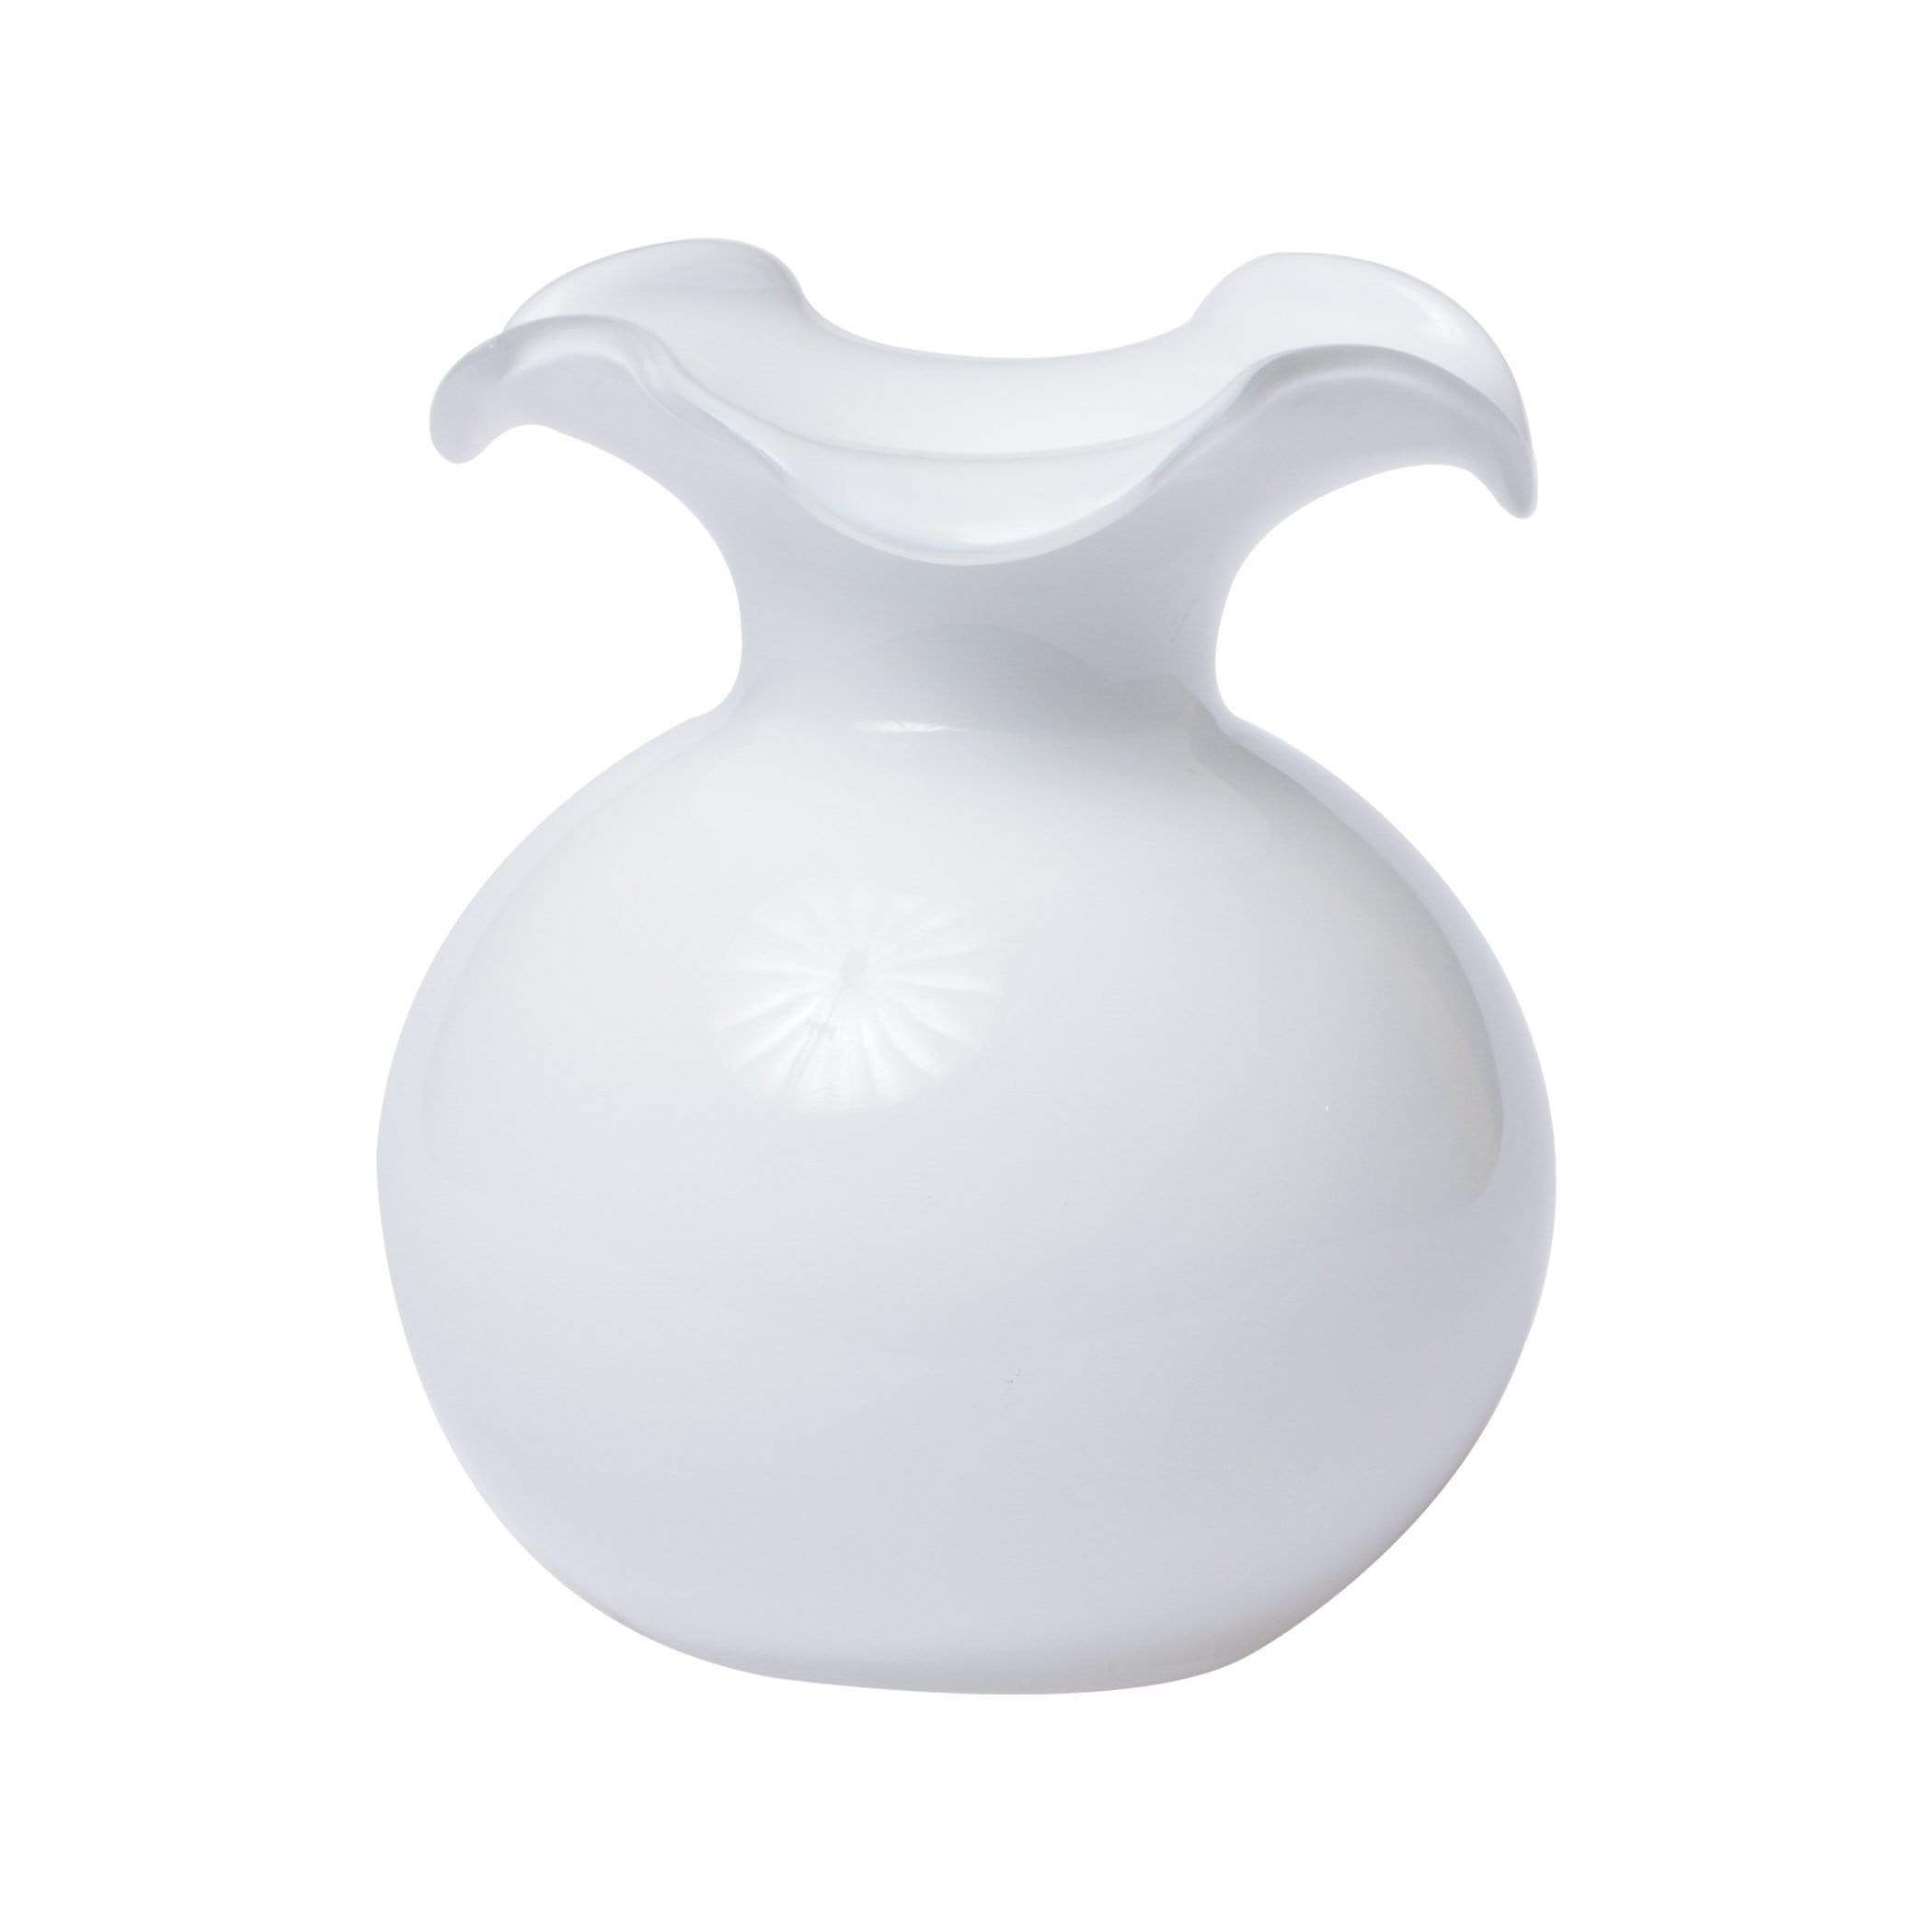 Vietri Hibiscus Glass White Fluted Vase - 3 Available Sizes